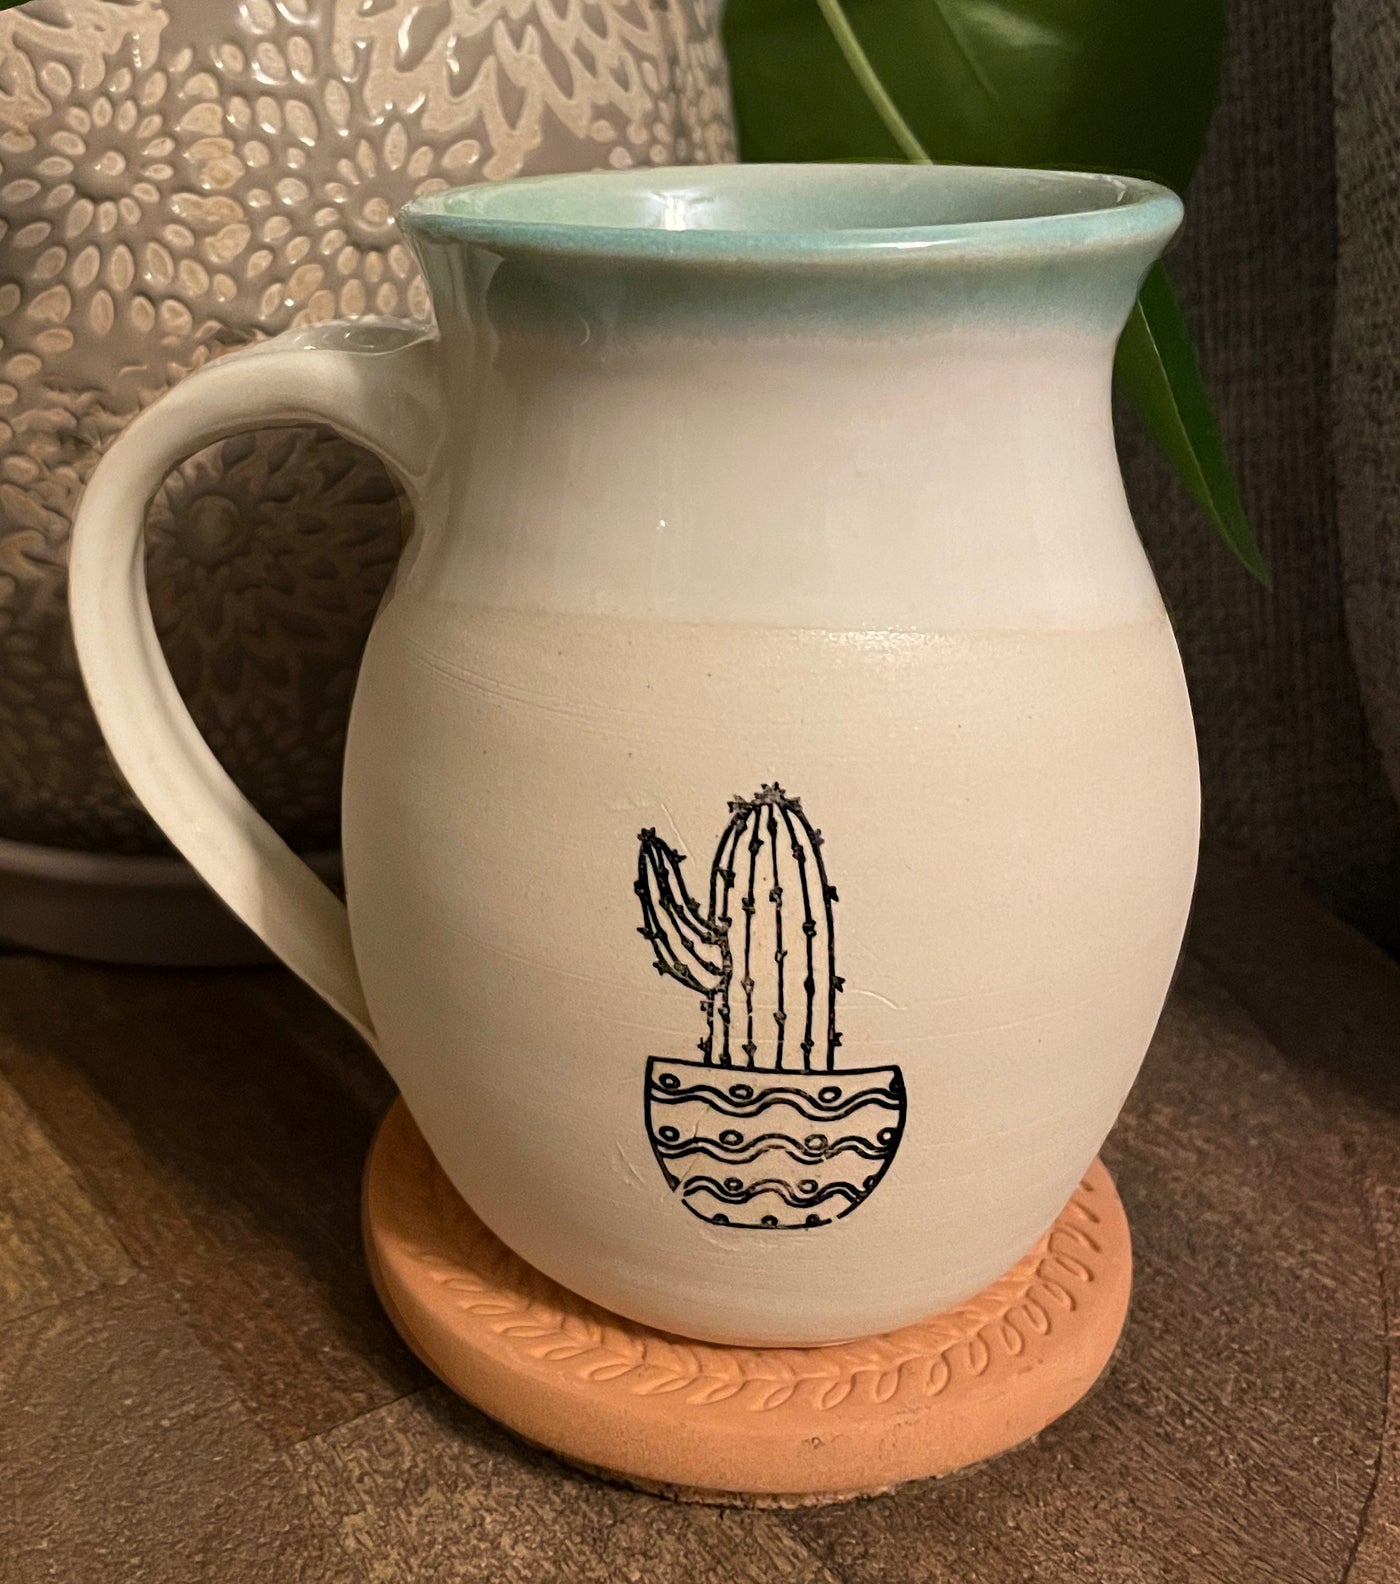 G8 These small batch, handmade mugs are available in blue or green. Each mug is stamped with a unique plant design. Explore the best and coolest gift ideas for plant enthusiasts!